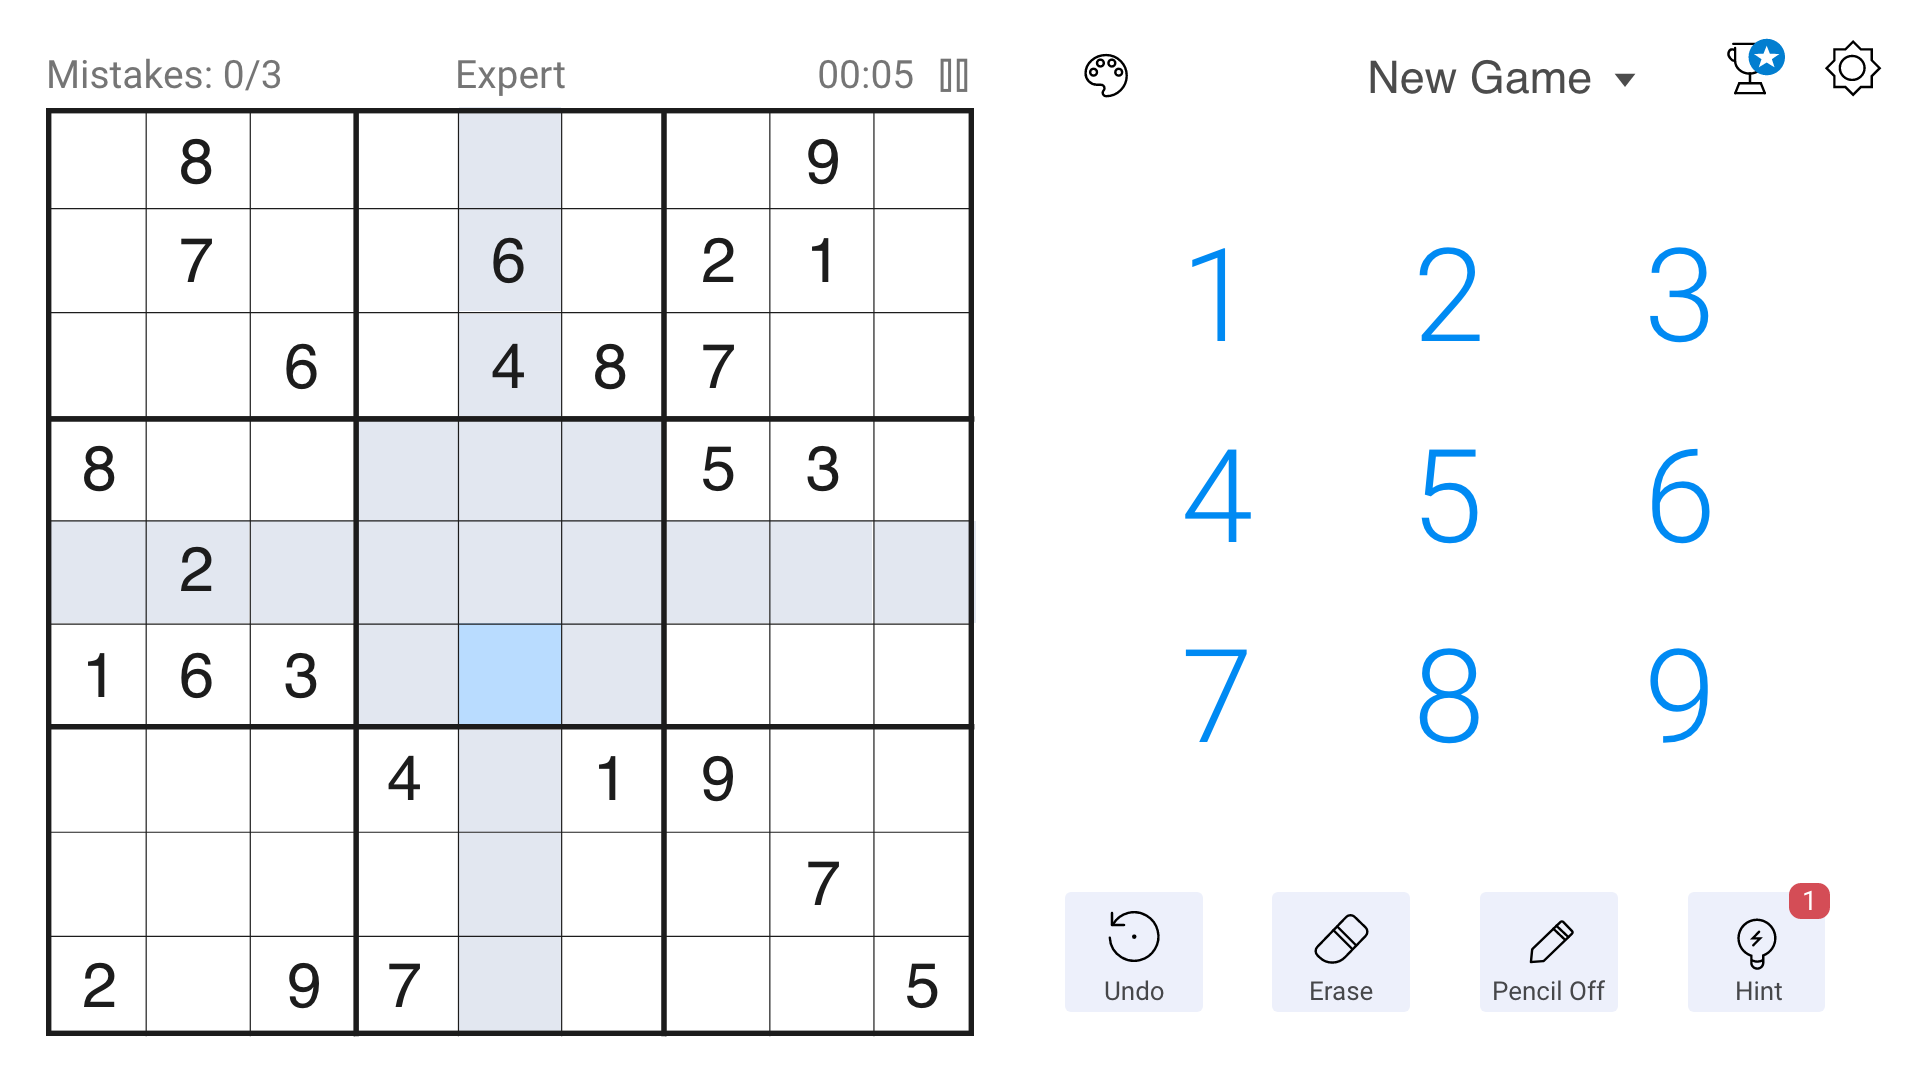 Killer Sudoku : Number Puzzles – Apps on Google Play